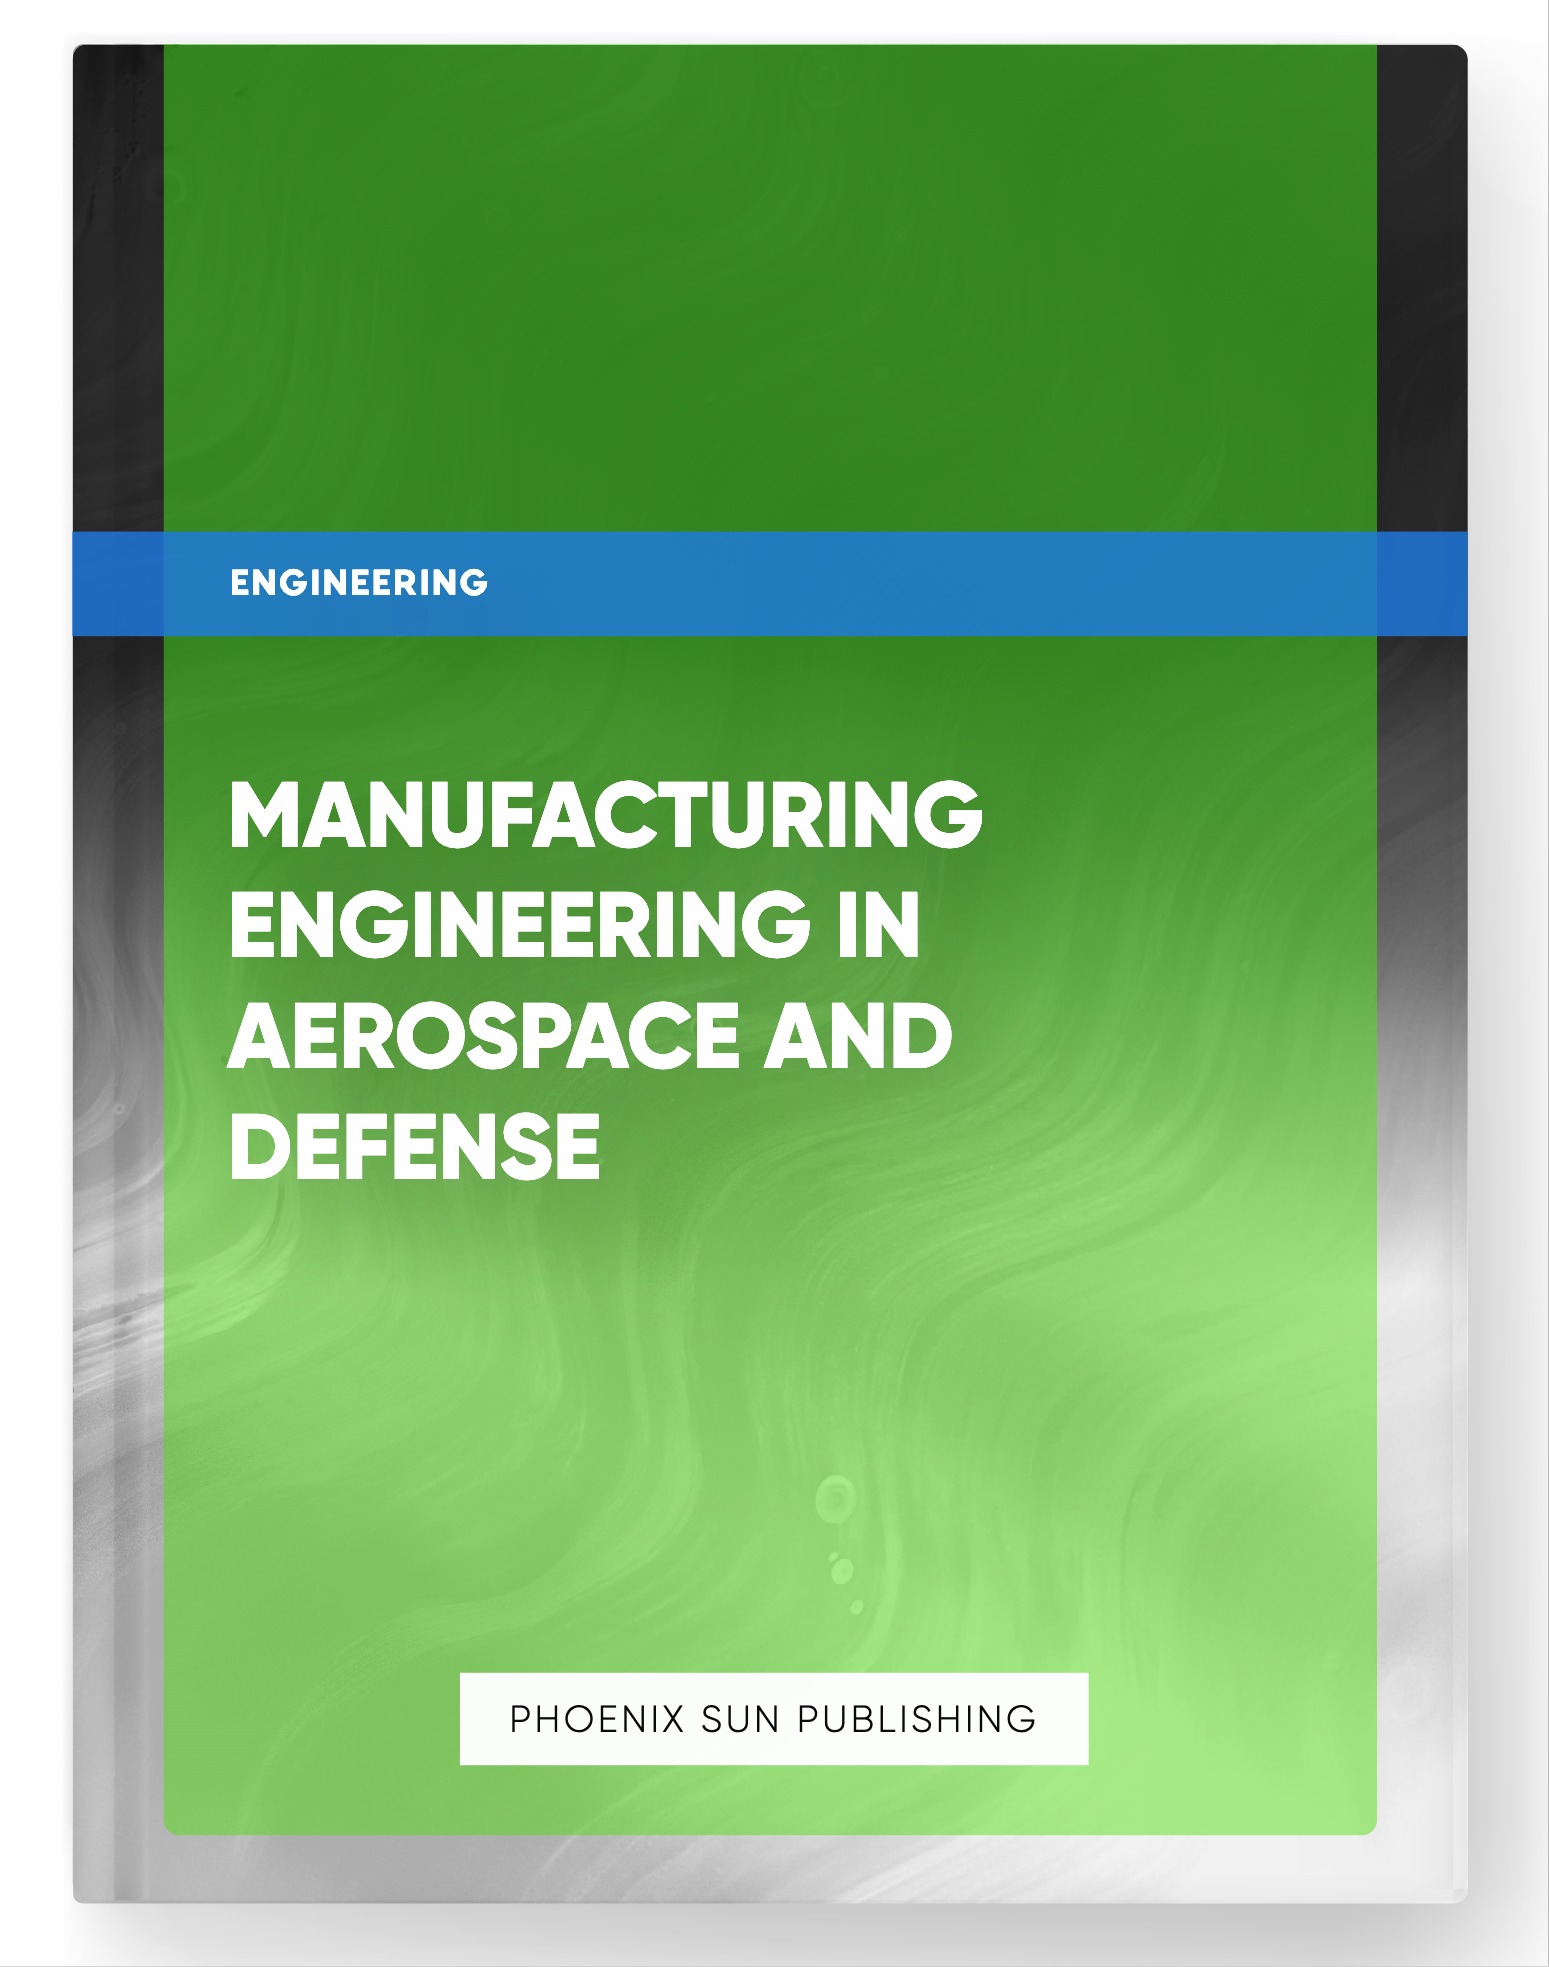 Manufacturing Engineering in Aerospace and Defense